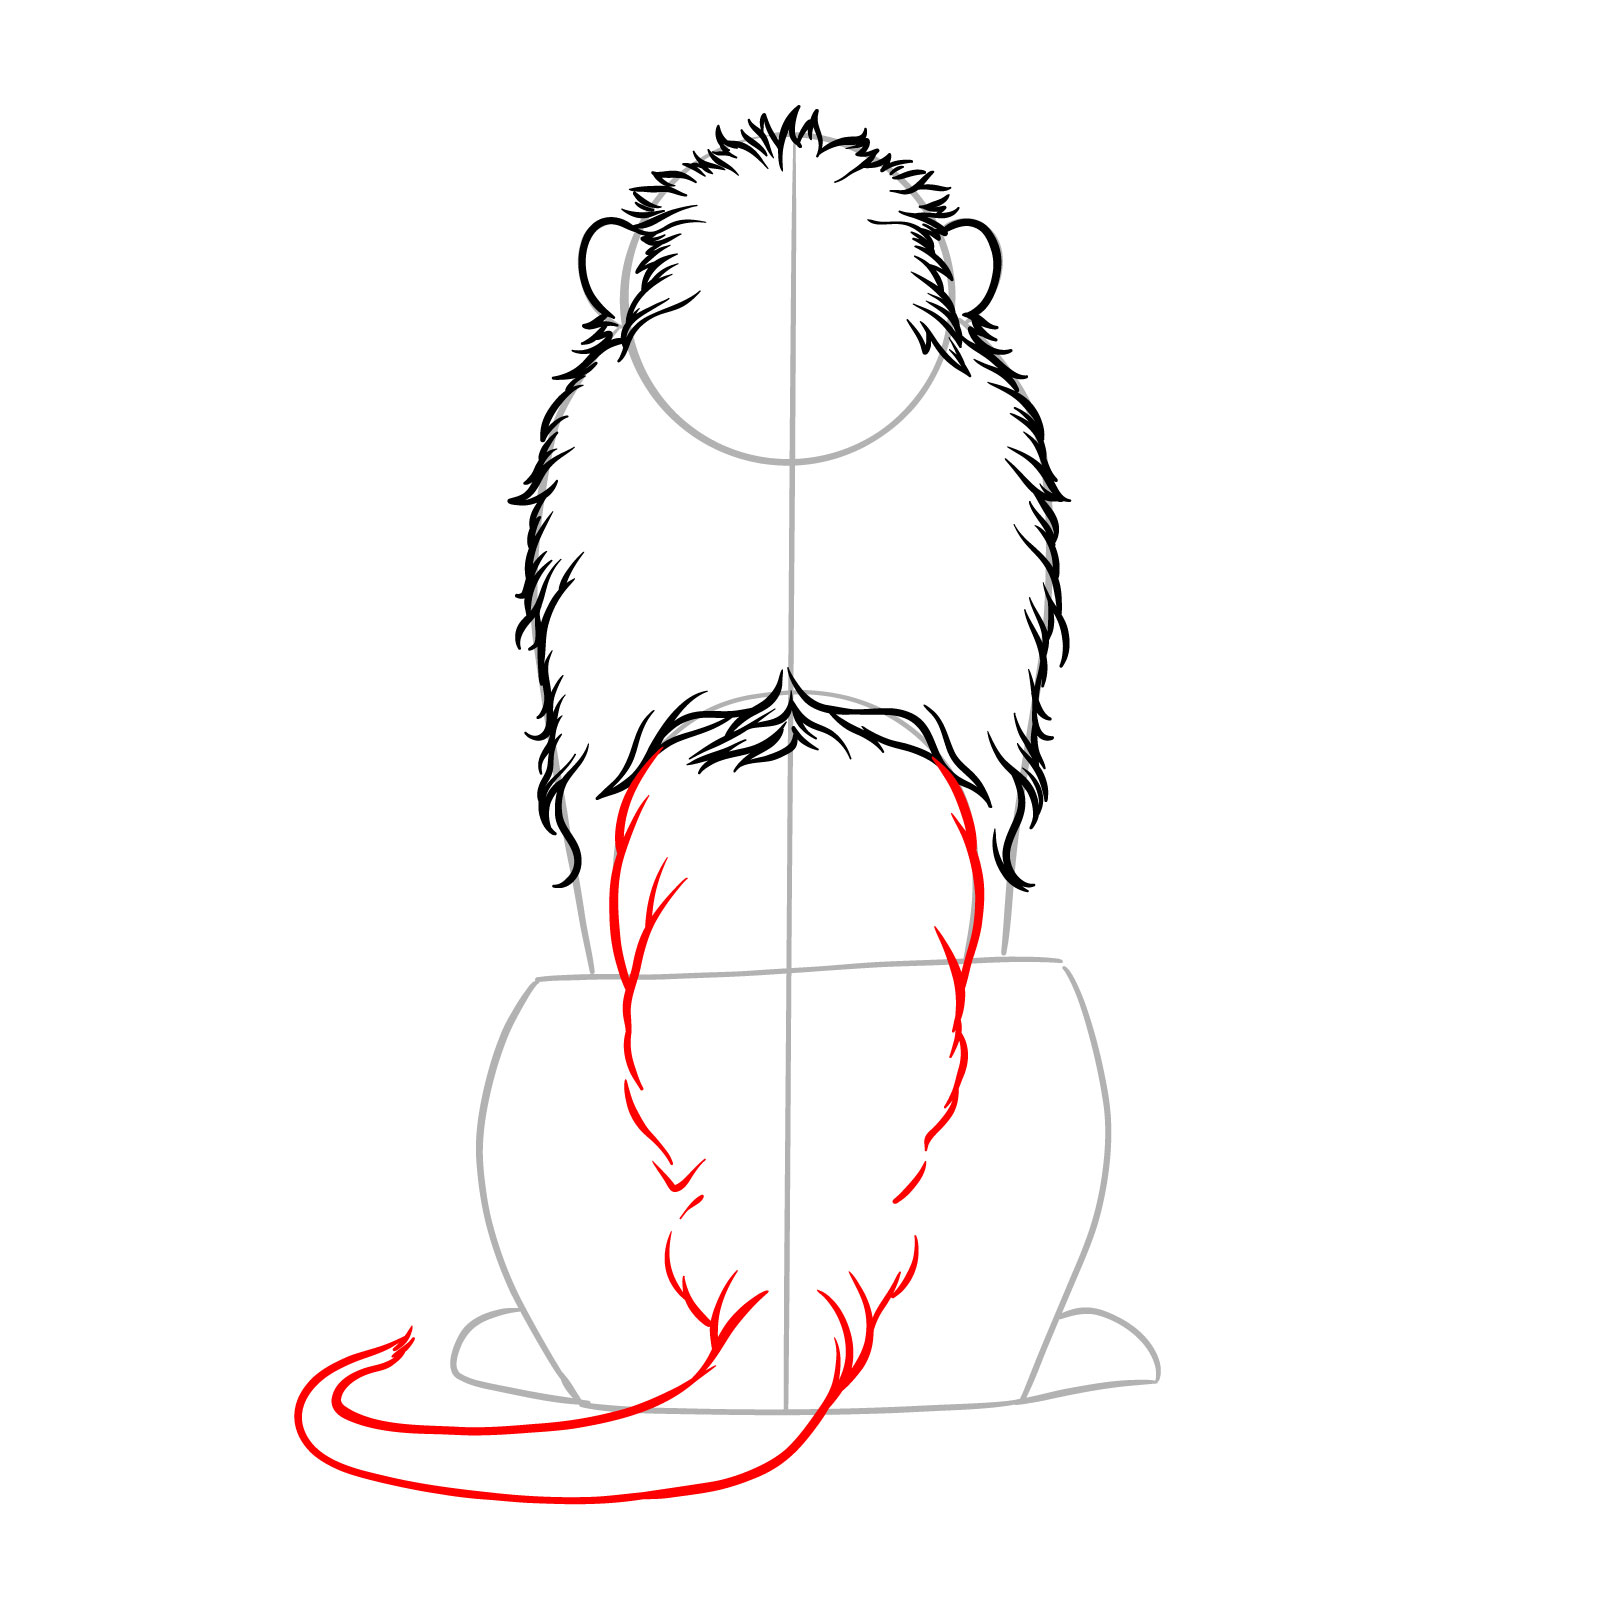 Step 7 in illustrating a sitting lion from the back view, adding back muscles and tail outline